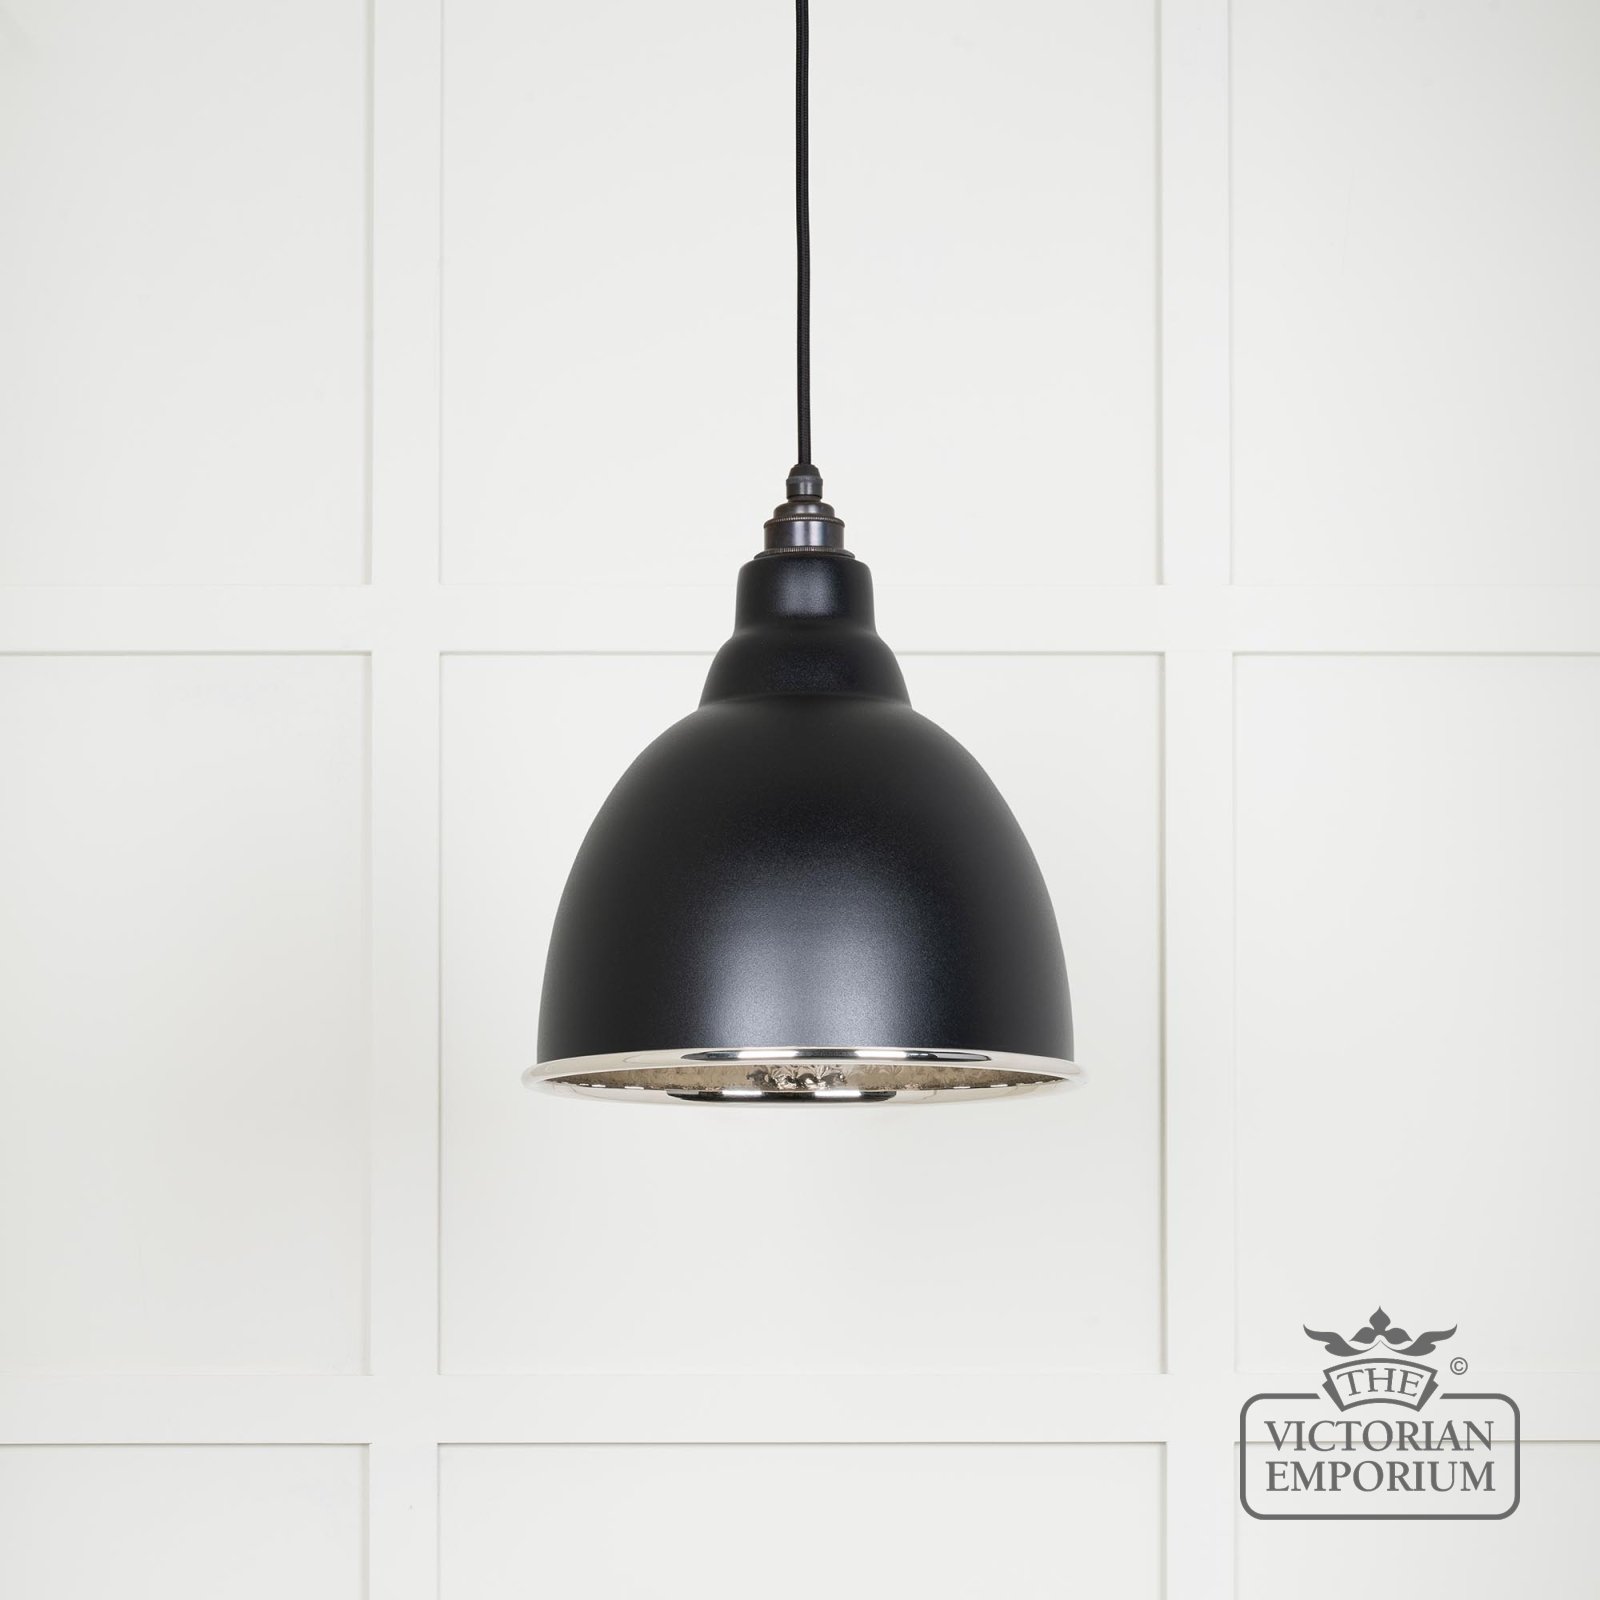 Brindle pendant light in Black with hammered nickel interior